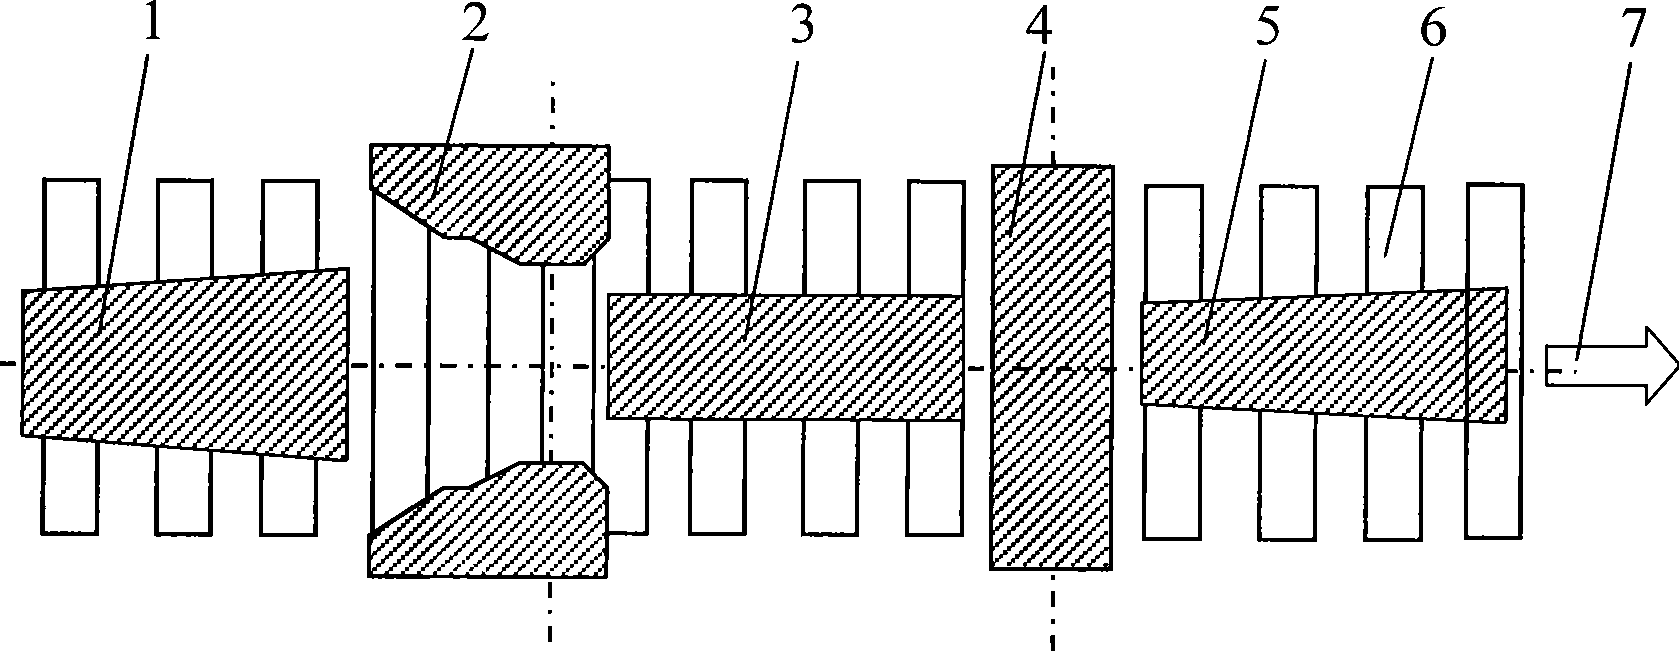 Control method for producing conical plate blank using side compression machine of fixed width plate blank